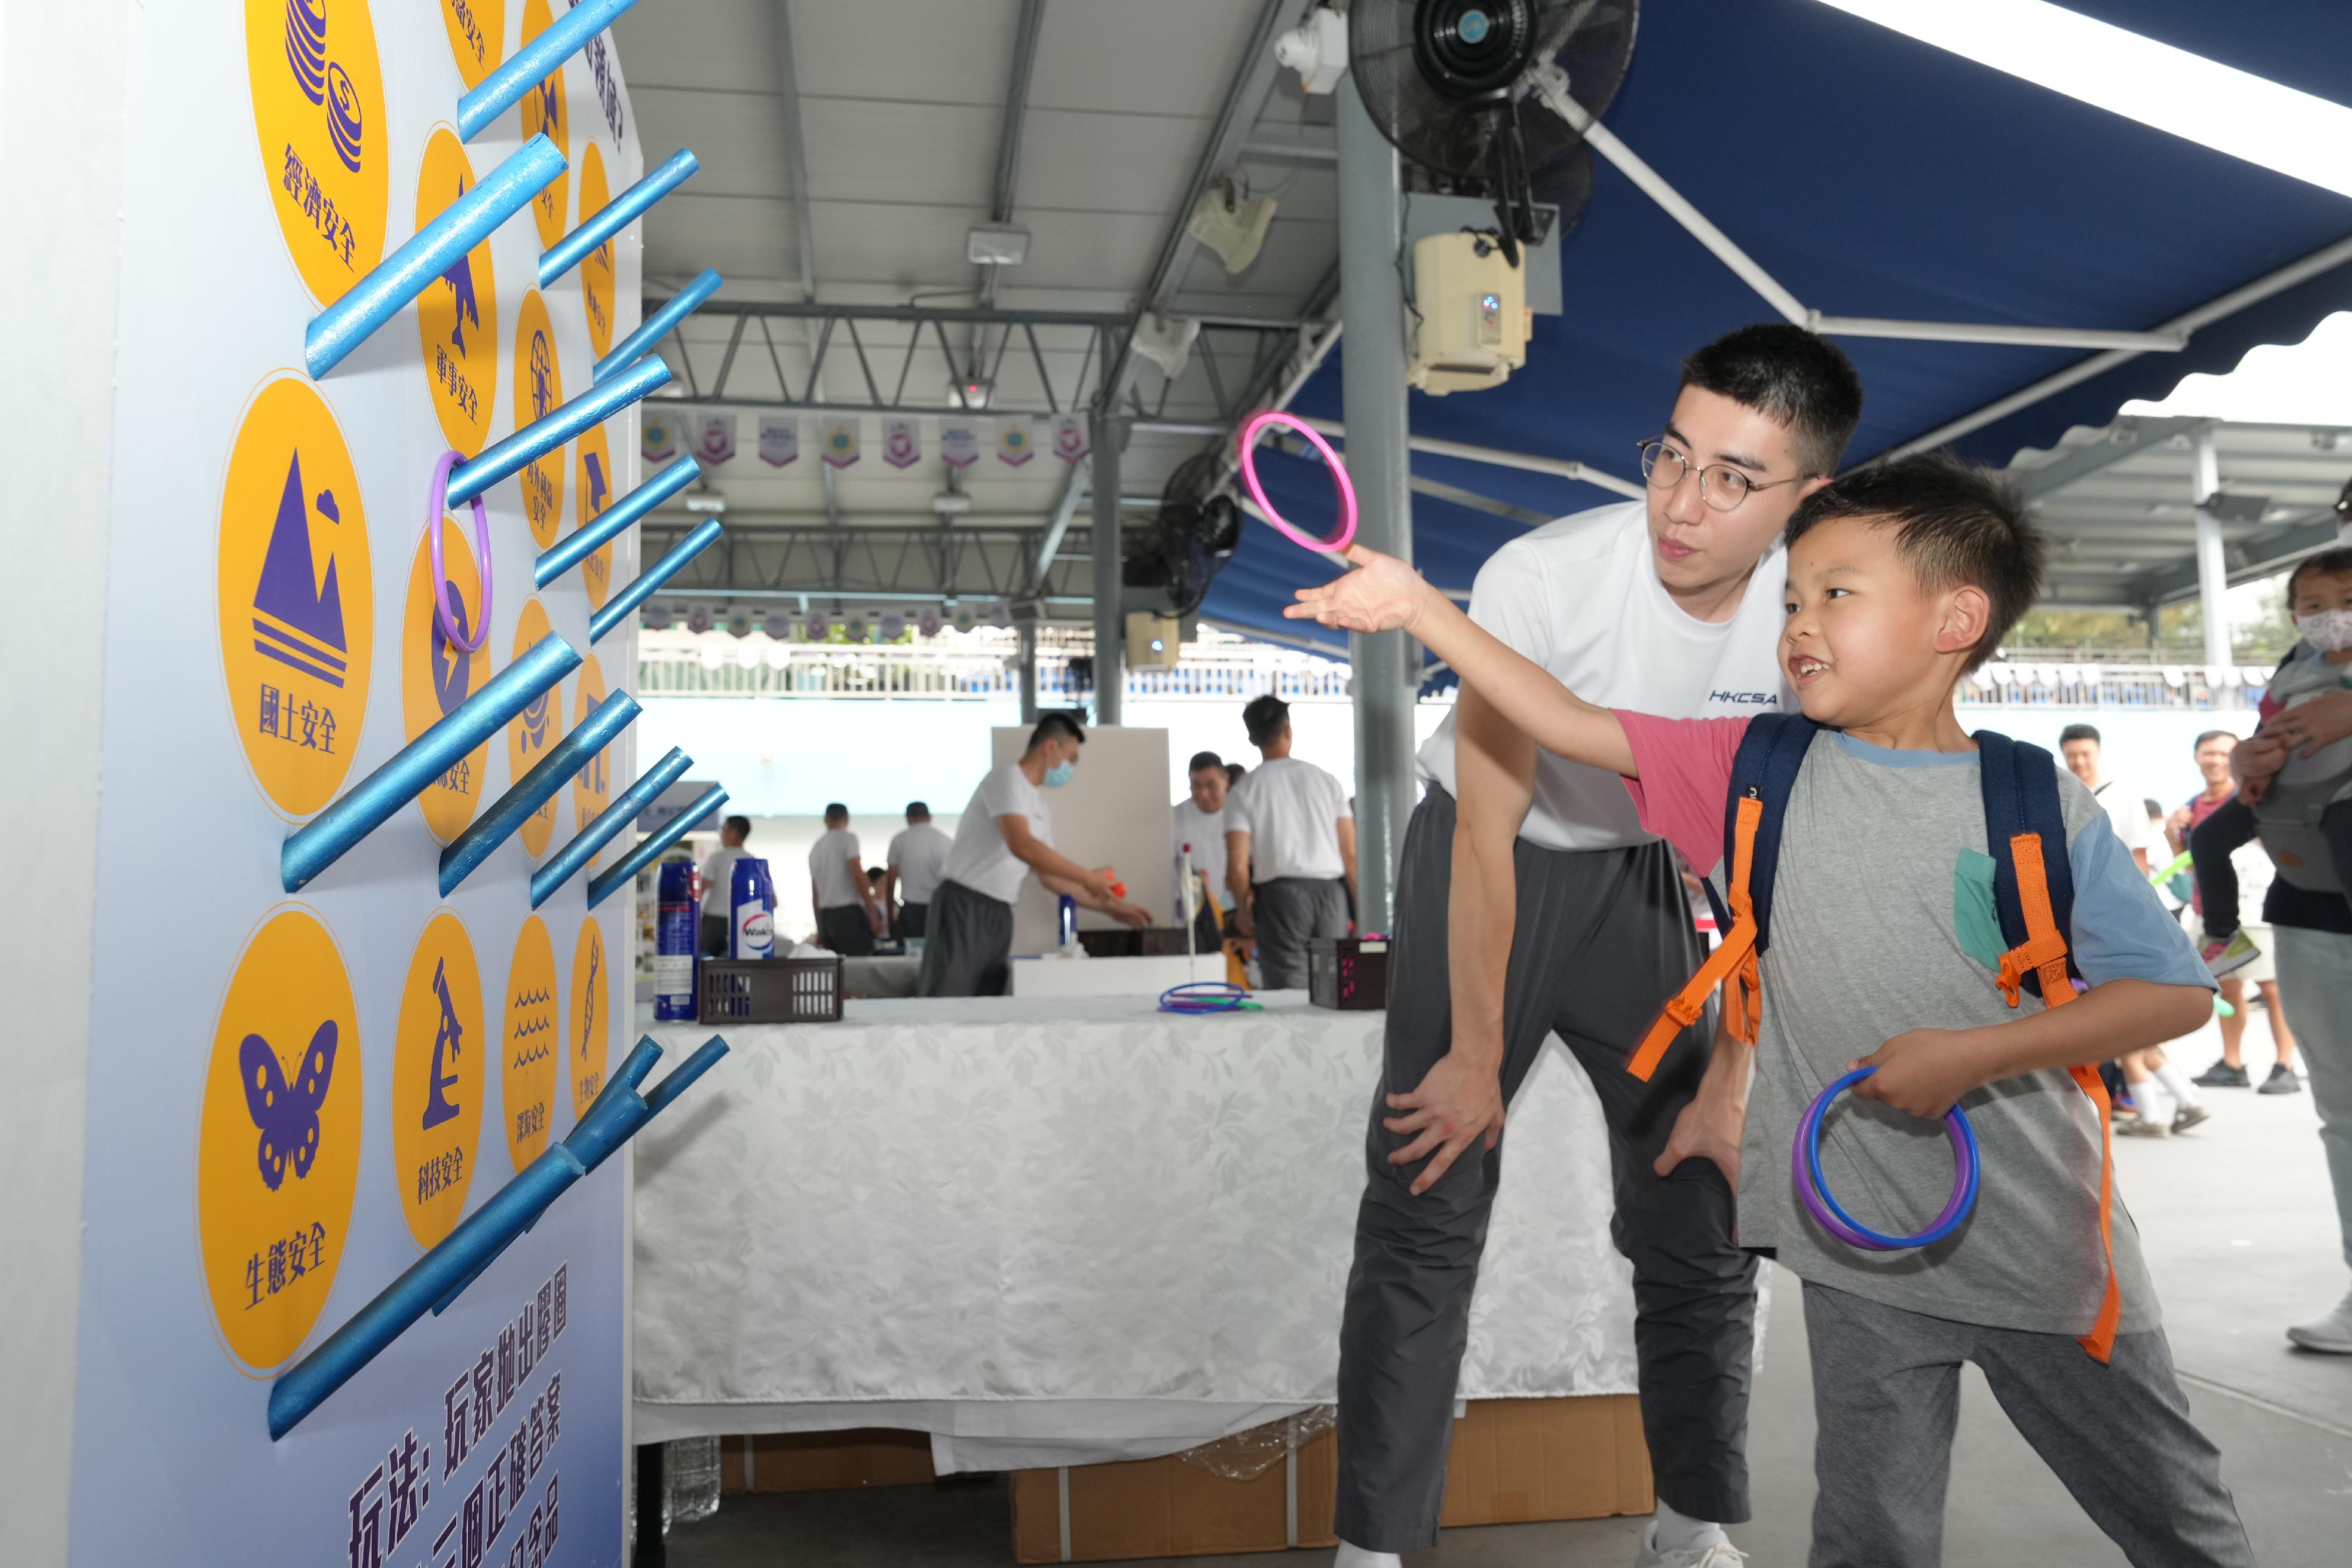 The Correctional Services Department held an open day at the Hong Kong Correctional Services Academy today (April 15), the National Security Education Day, to deepen the public's understanding of national security and the work of the department, including its work and effectiveness in safeguarding national security. Photo shows a member of the public playing booth games.